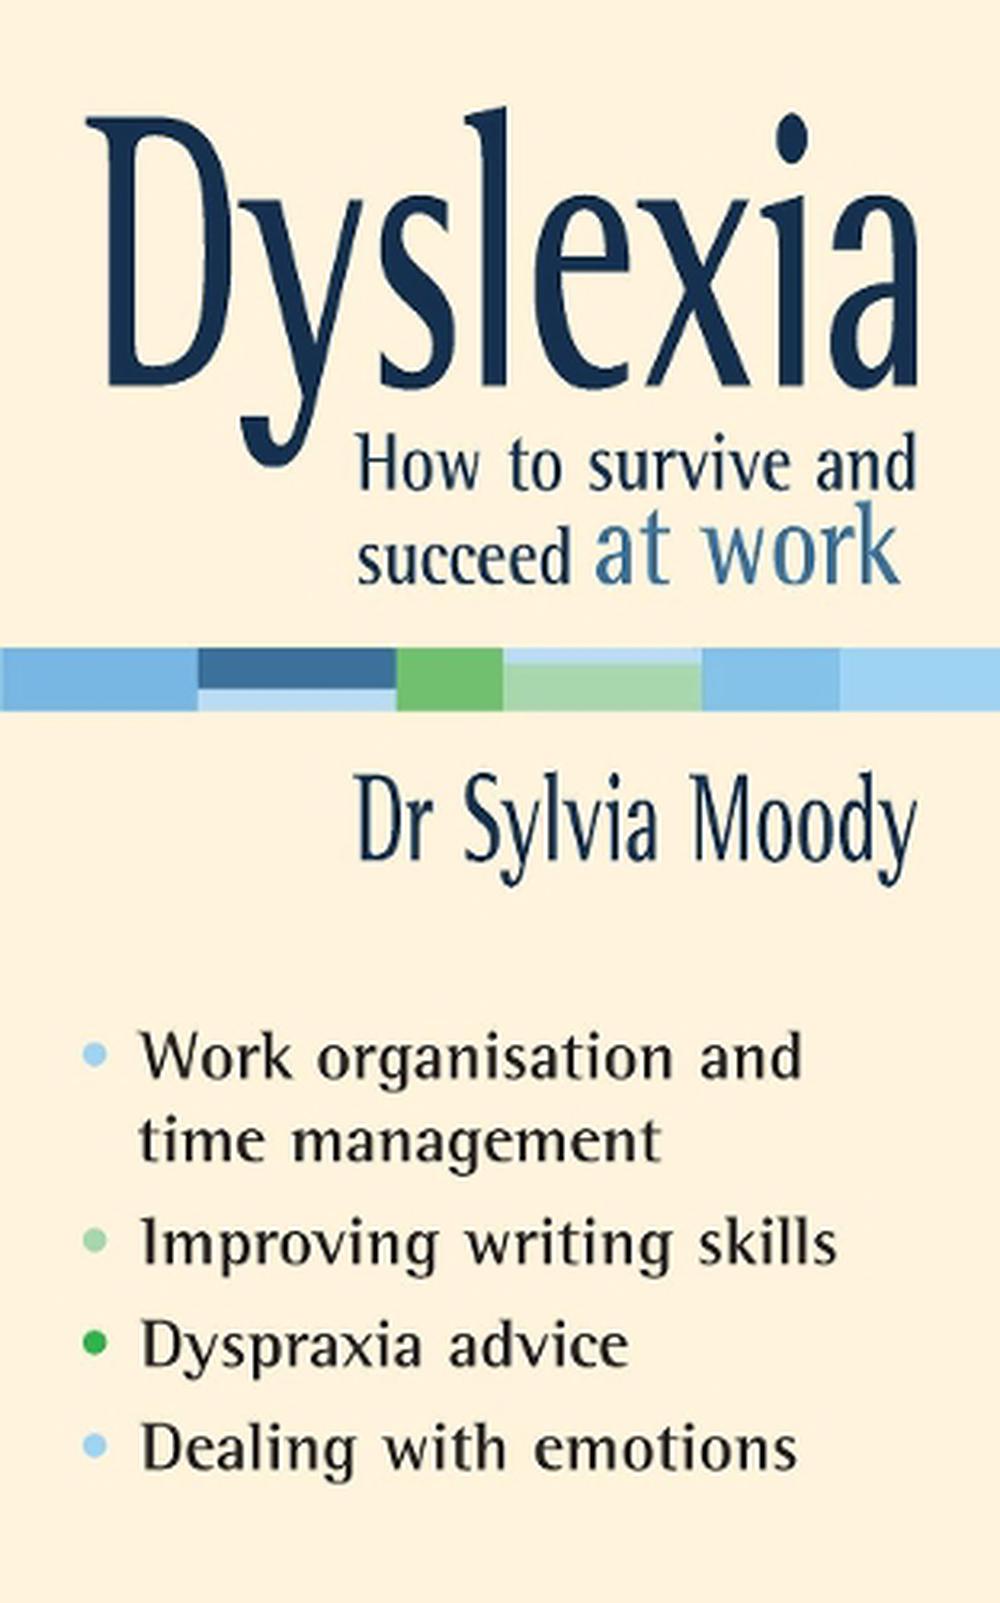 dyslexia how to survive and succeed at work